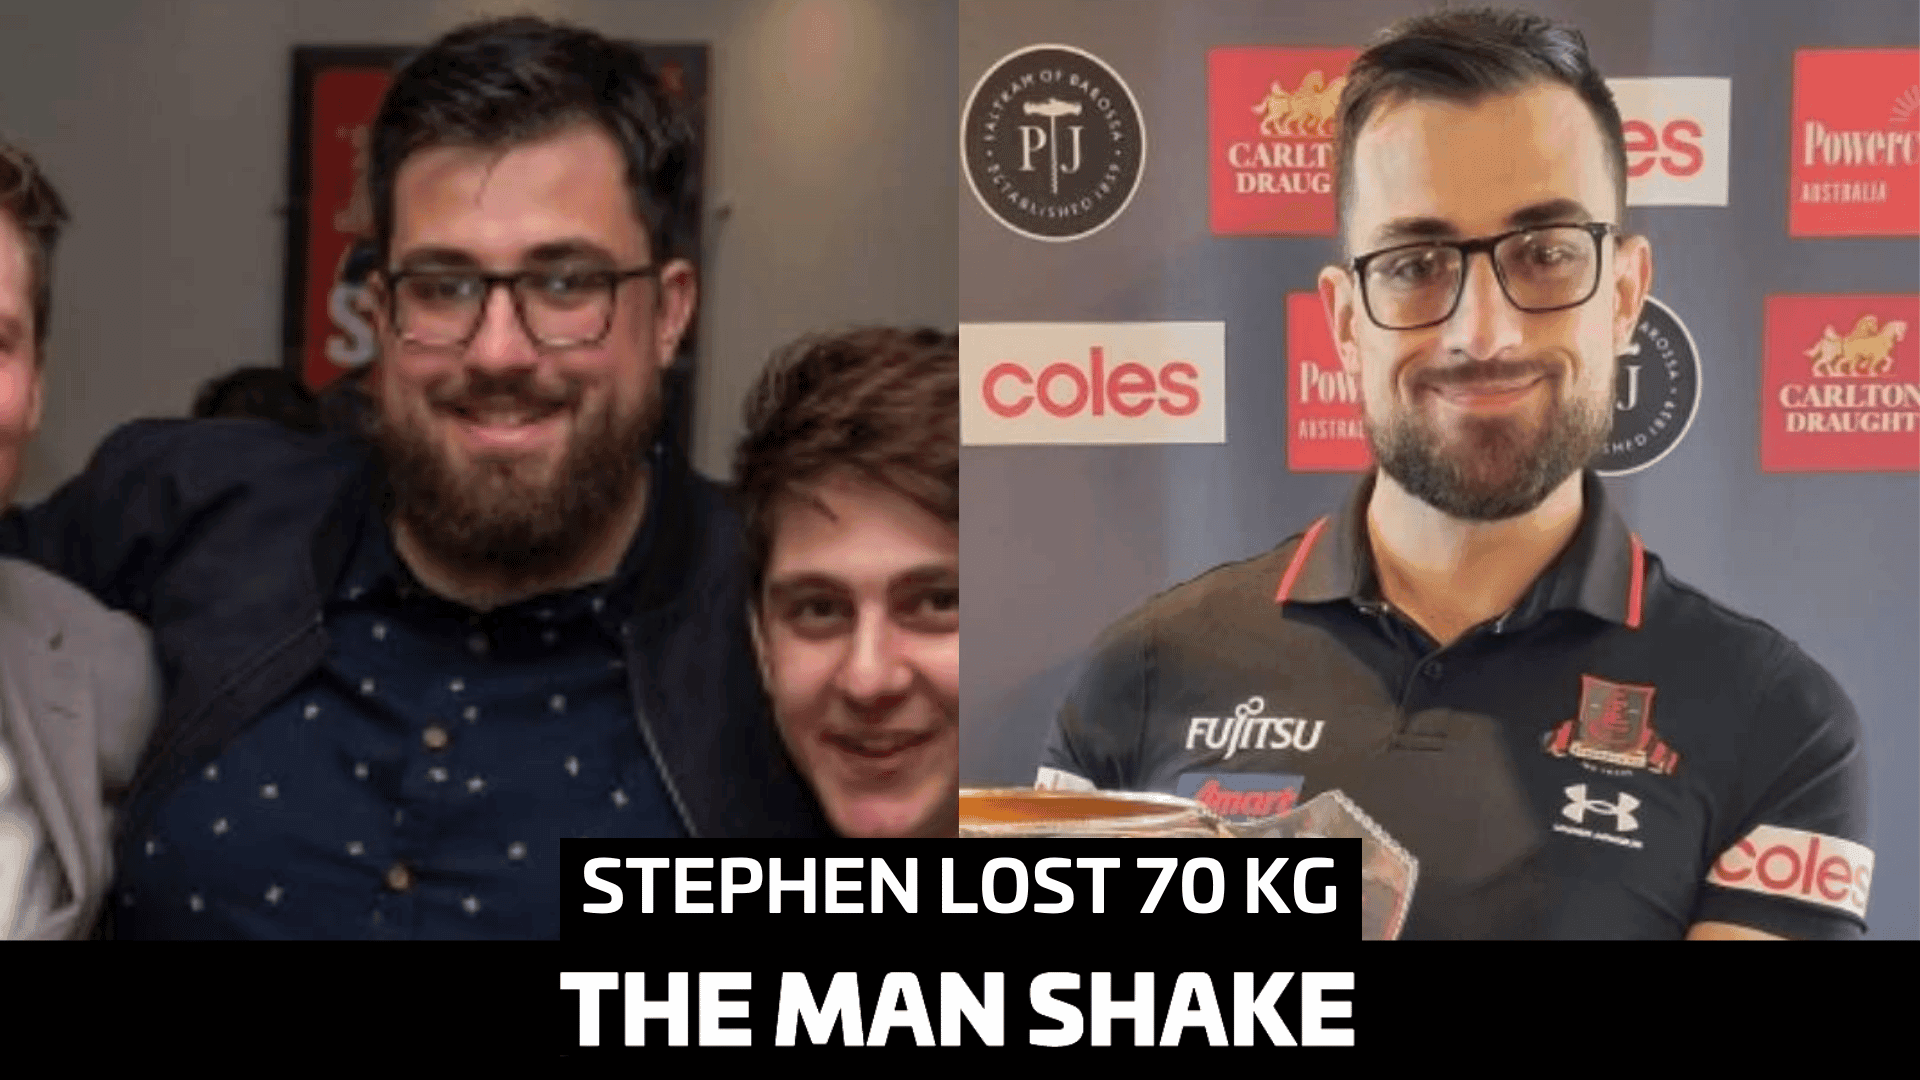 Stephen didn’t want to let his family down so lost 70kgs!